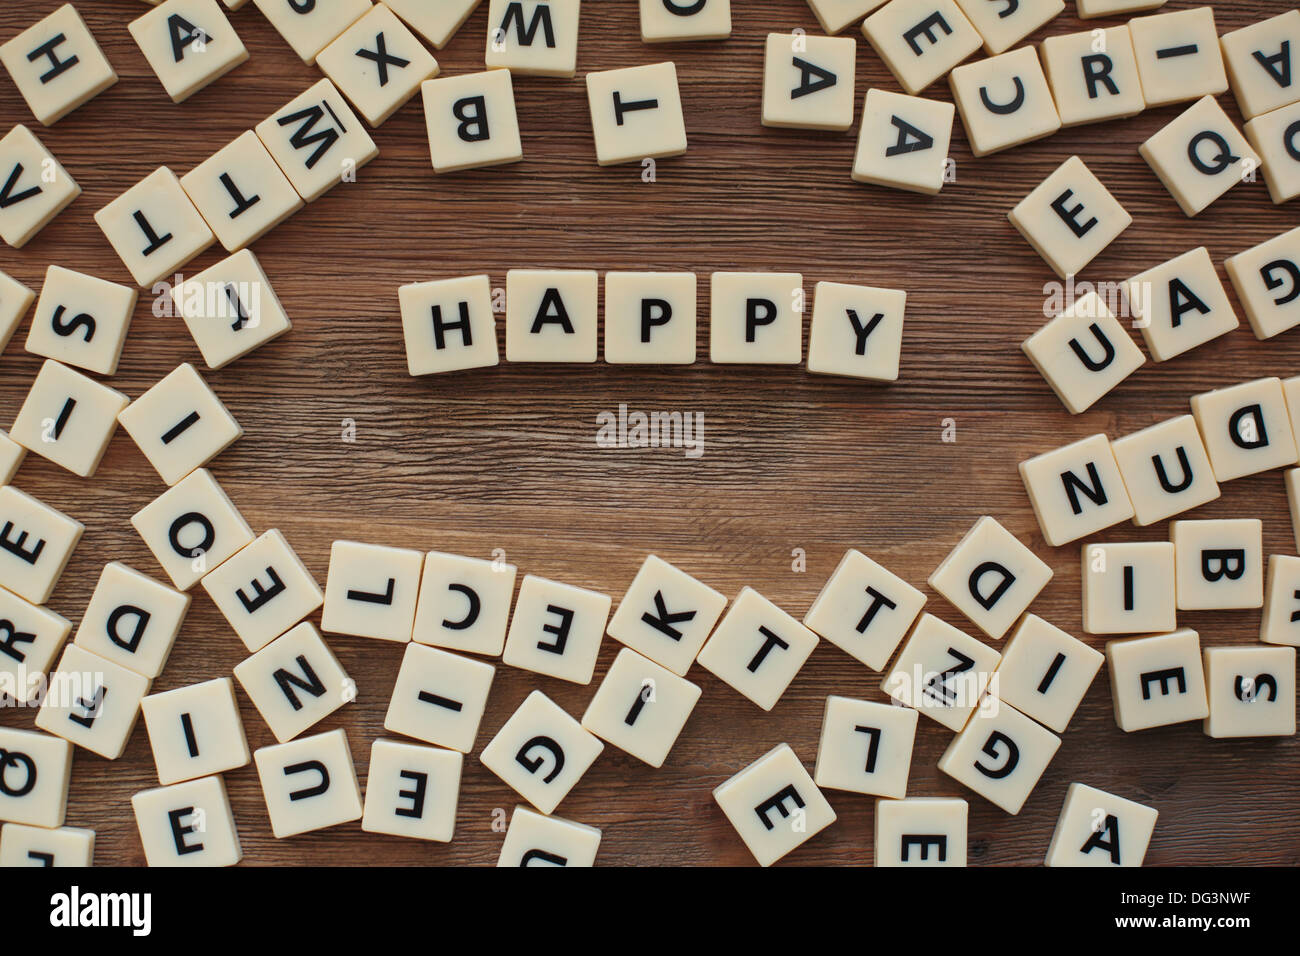 Plastic letters from a childrens' spelling game on a wooden table spell 'Happy' Stock Photo